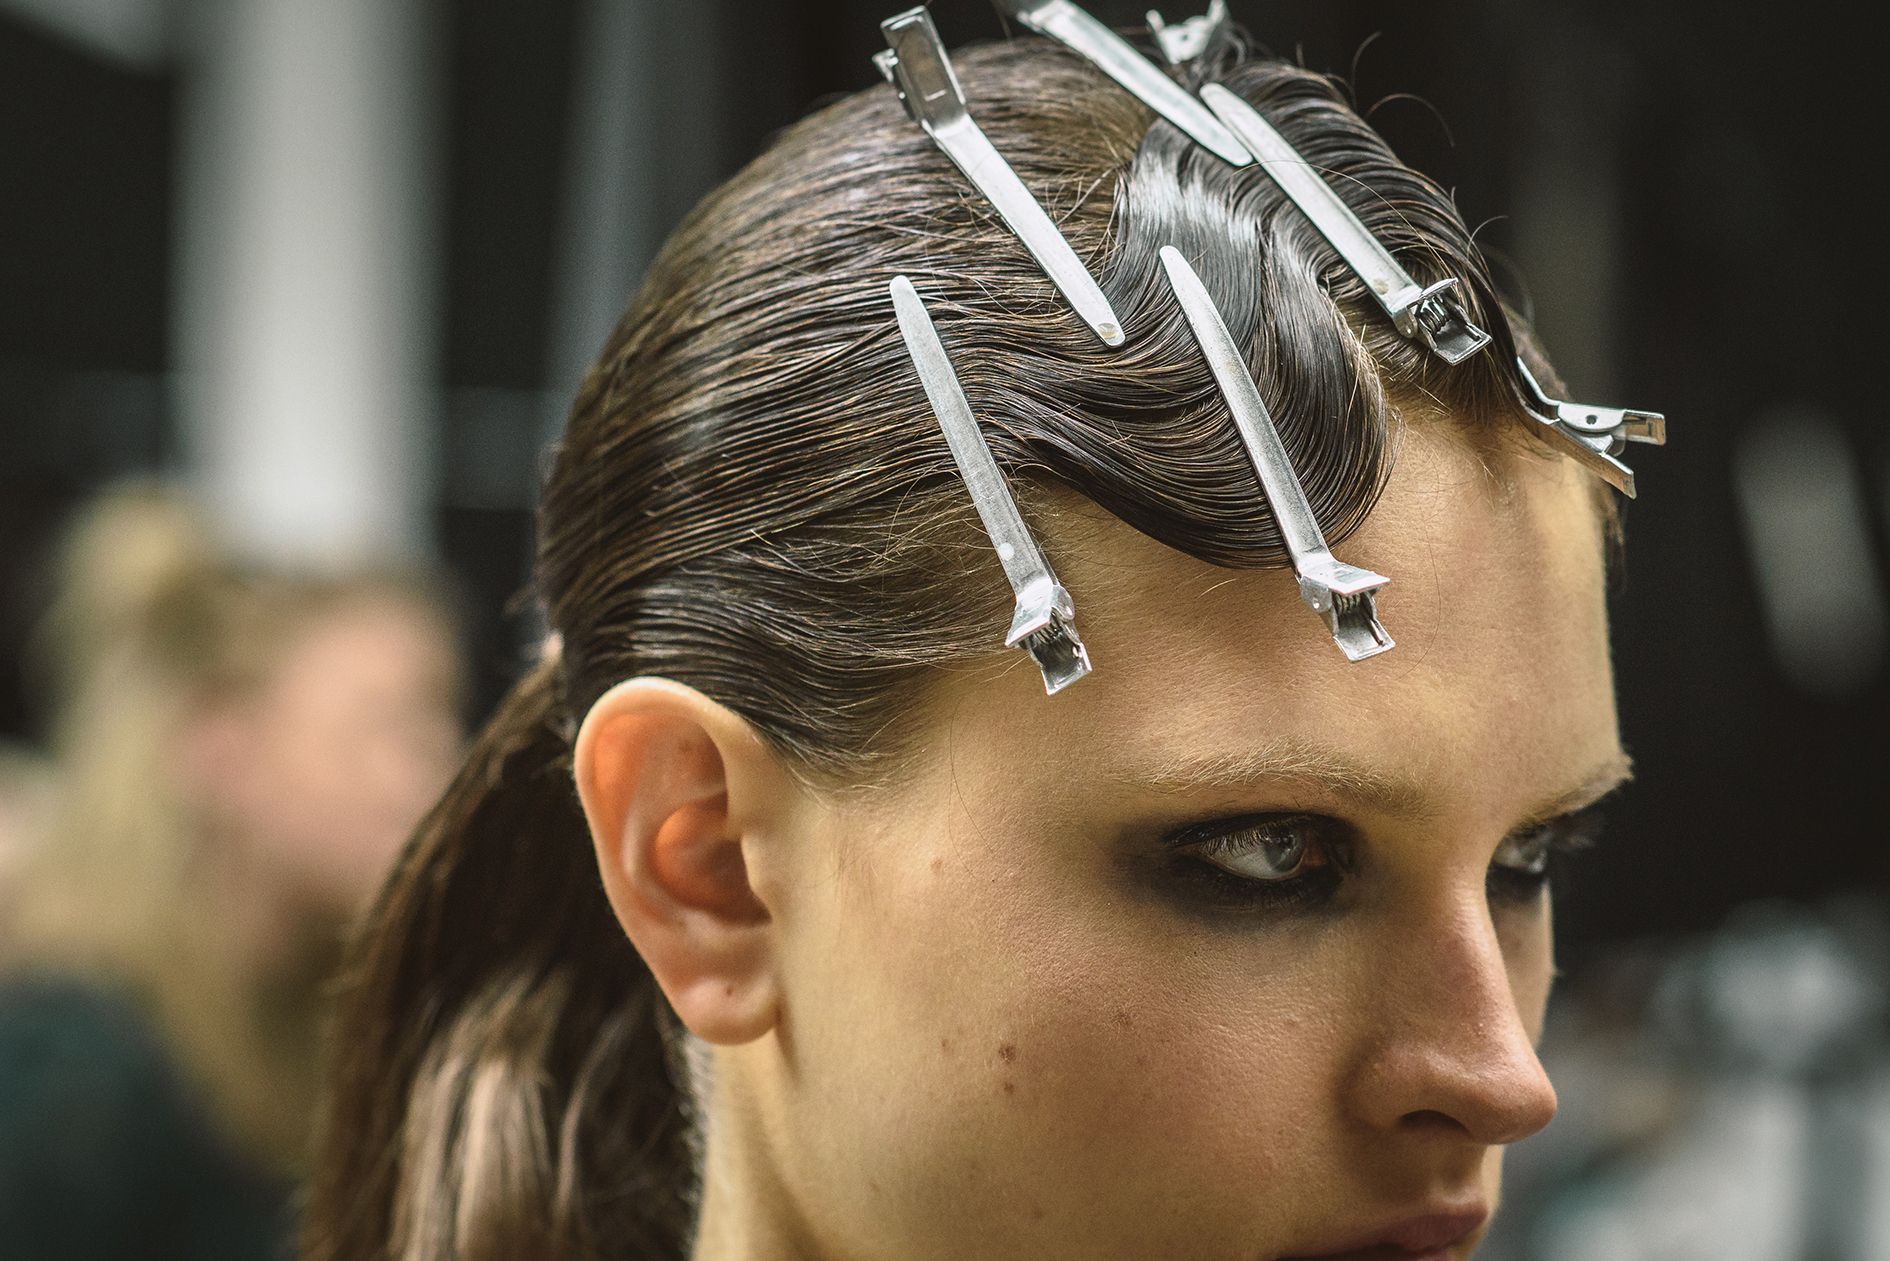 L'Oreal image from GFW25.jpg